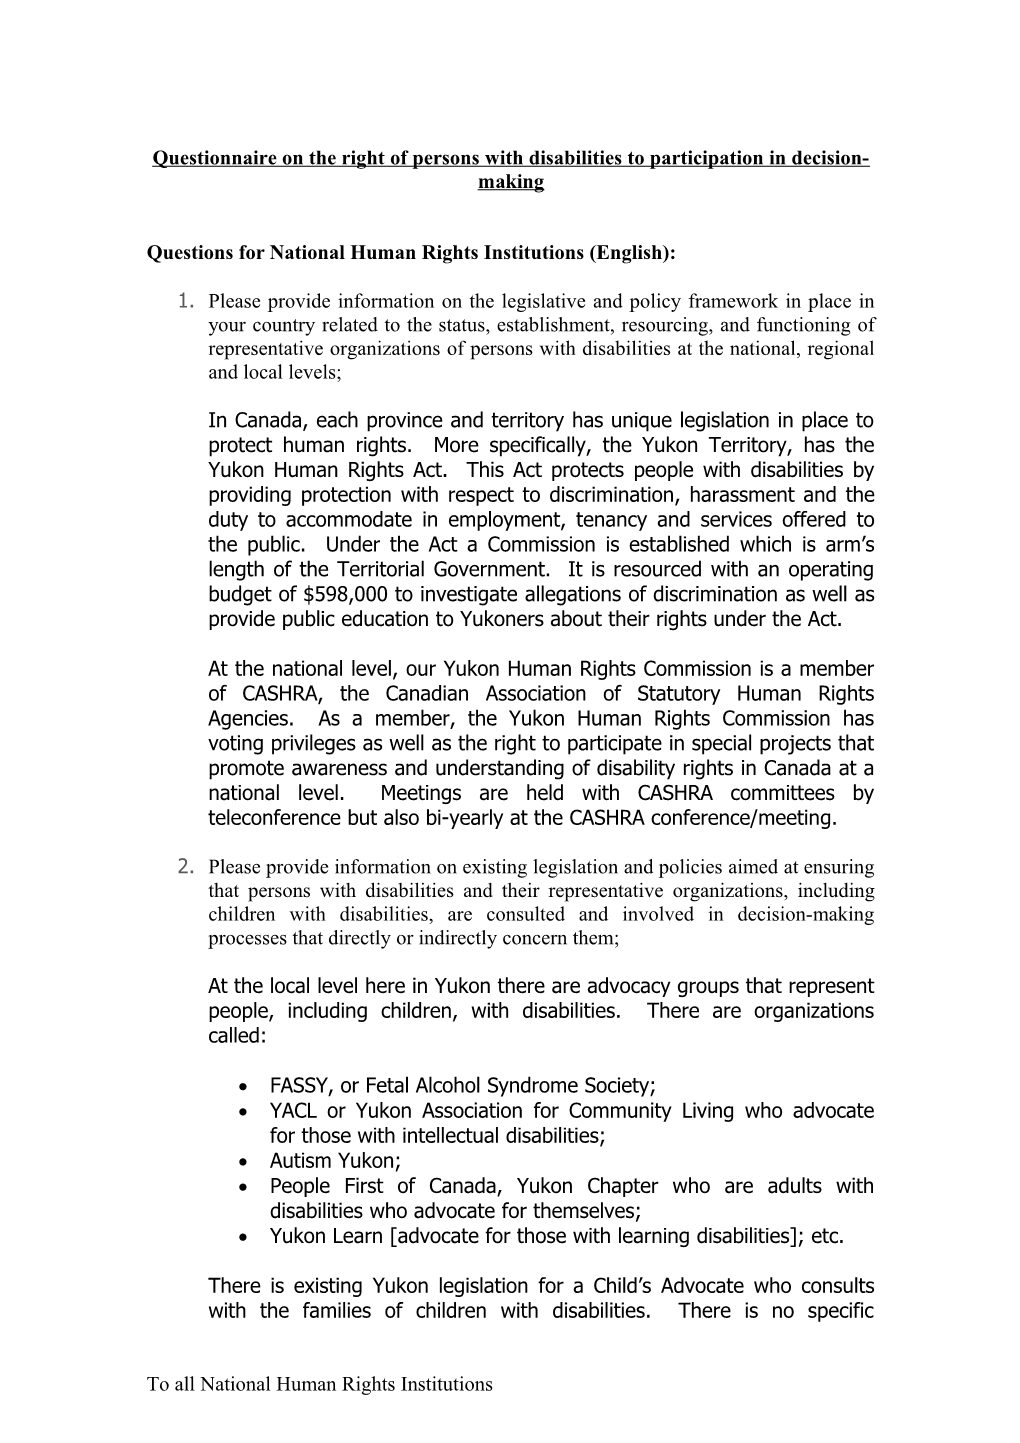 Questions for National Human Rights Institutions (English)